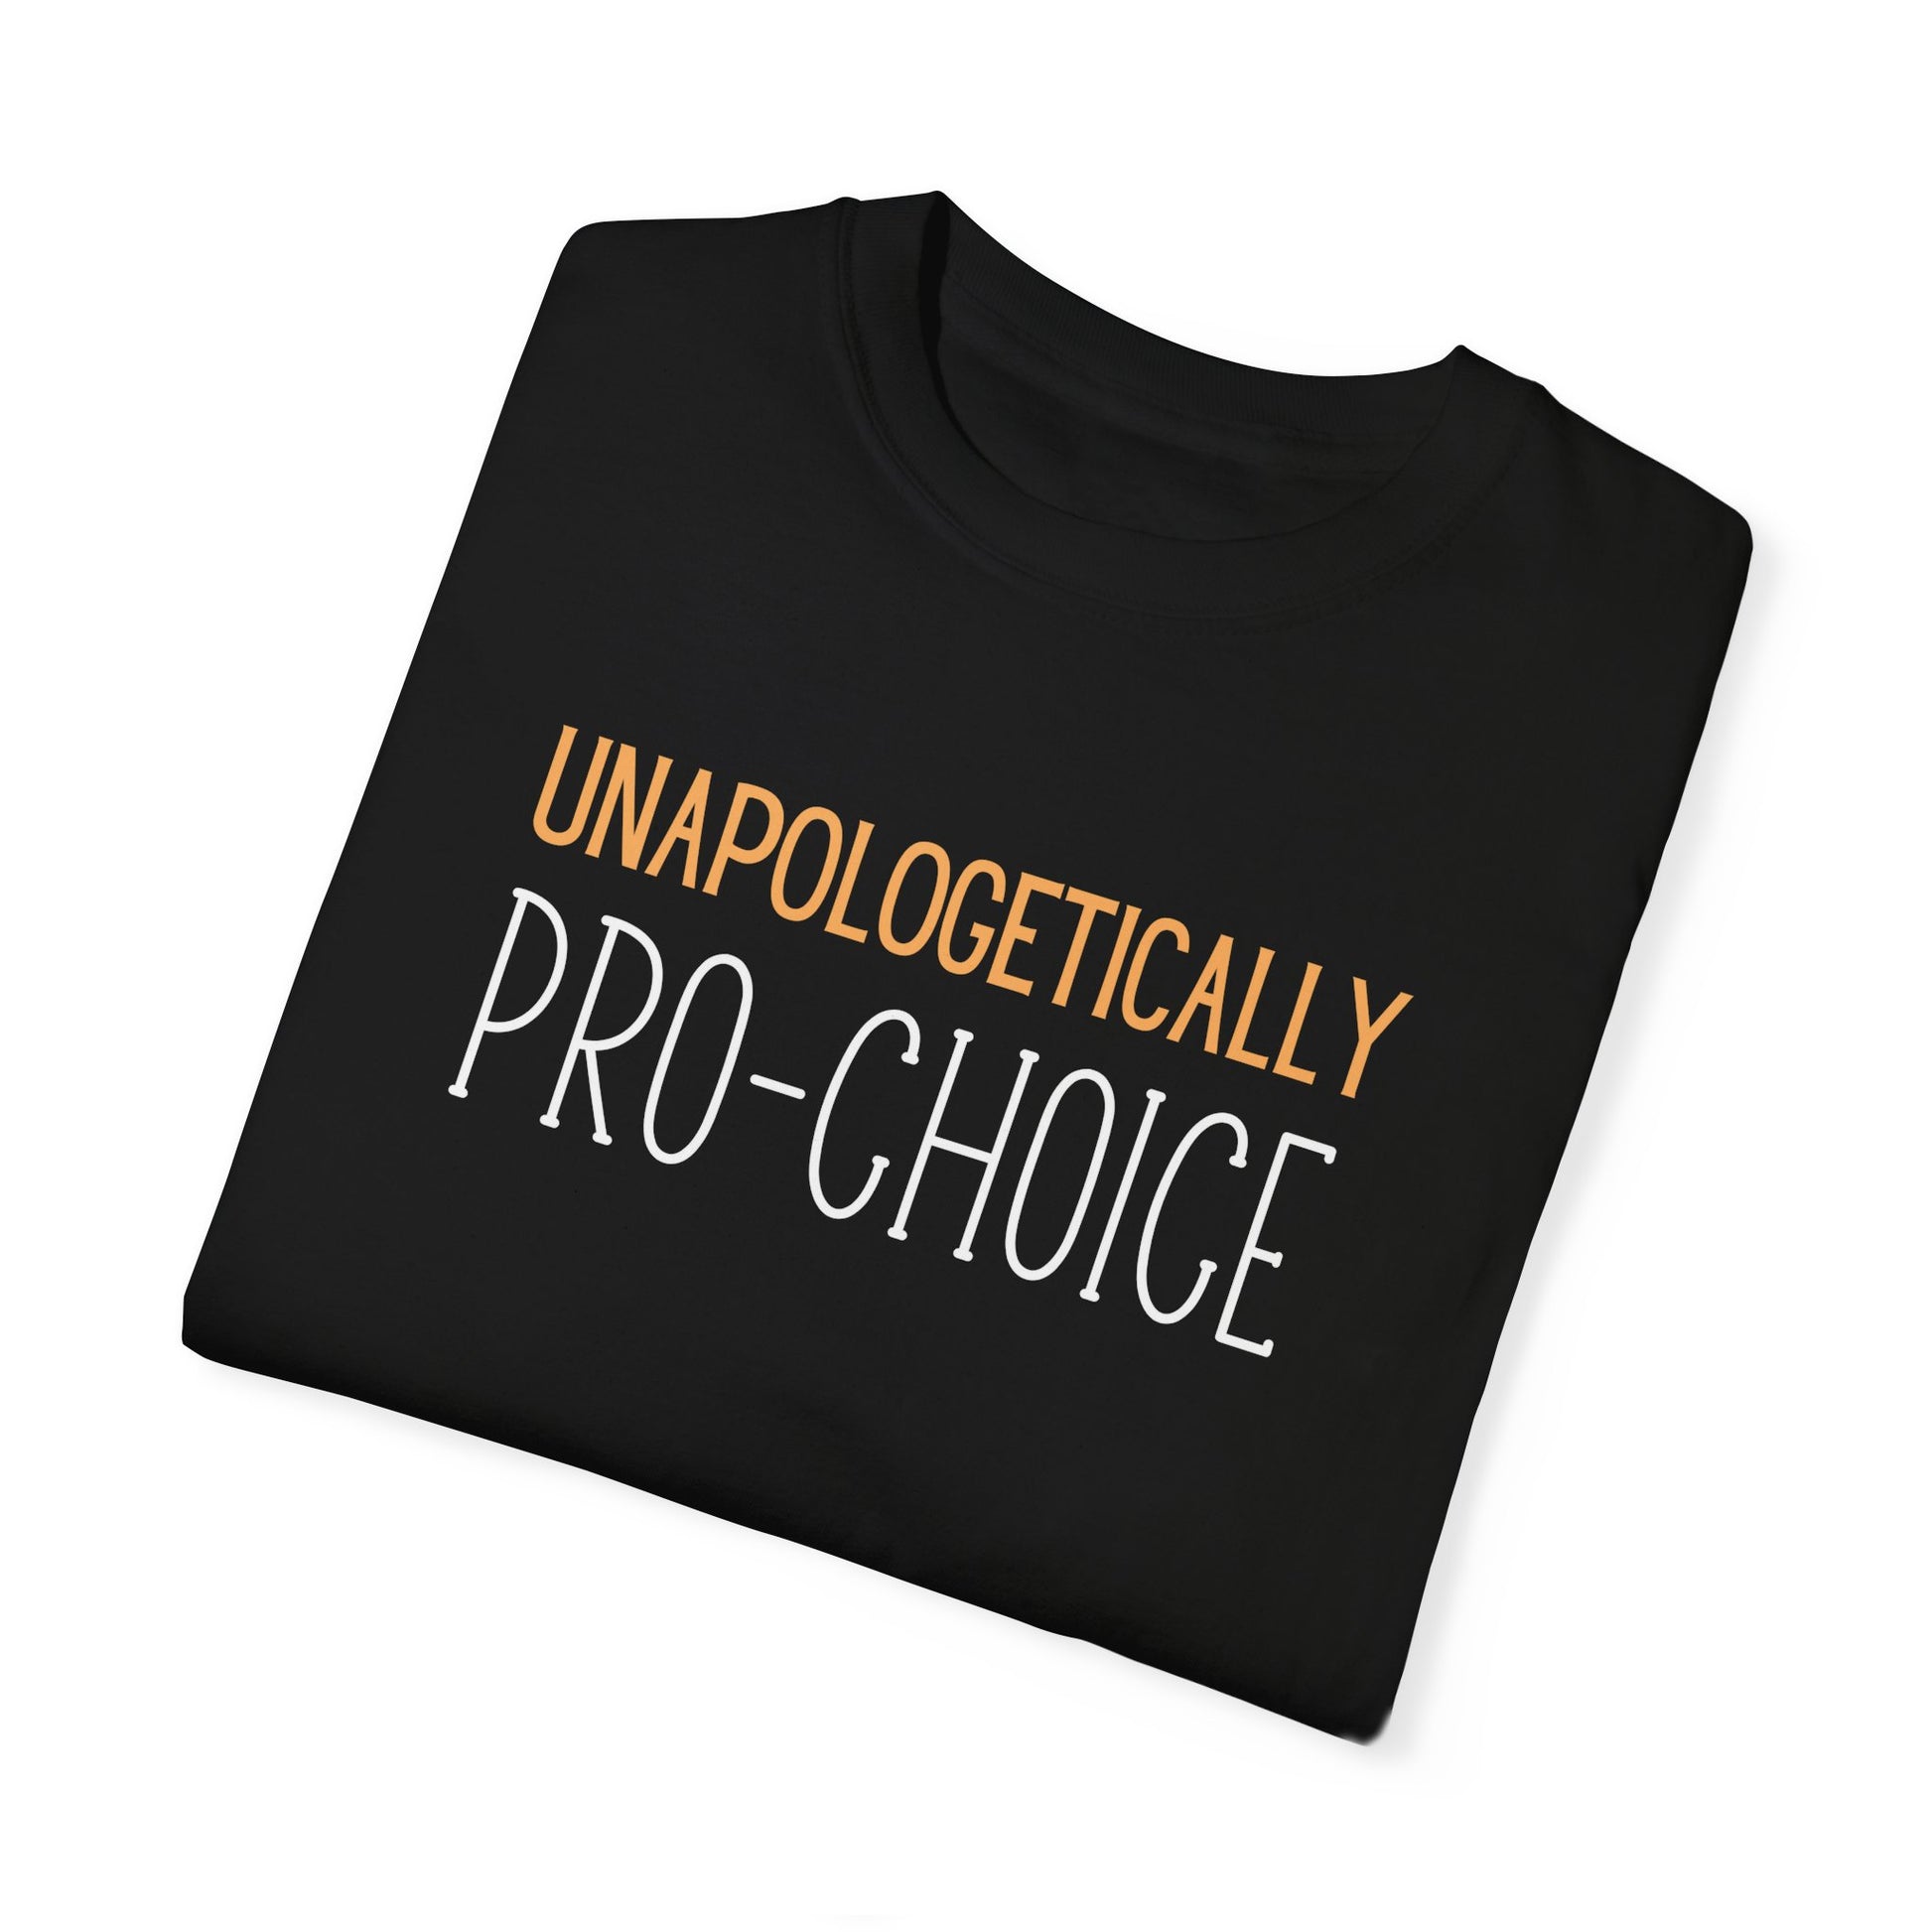 Ideal for groups interested in protecting civil liberties, and individuals who want to spread awareness about reproductive rights. The simple black color is the perfect background for a direct message.